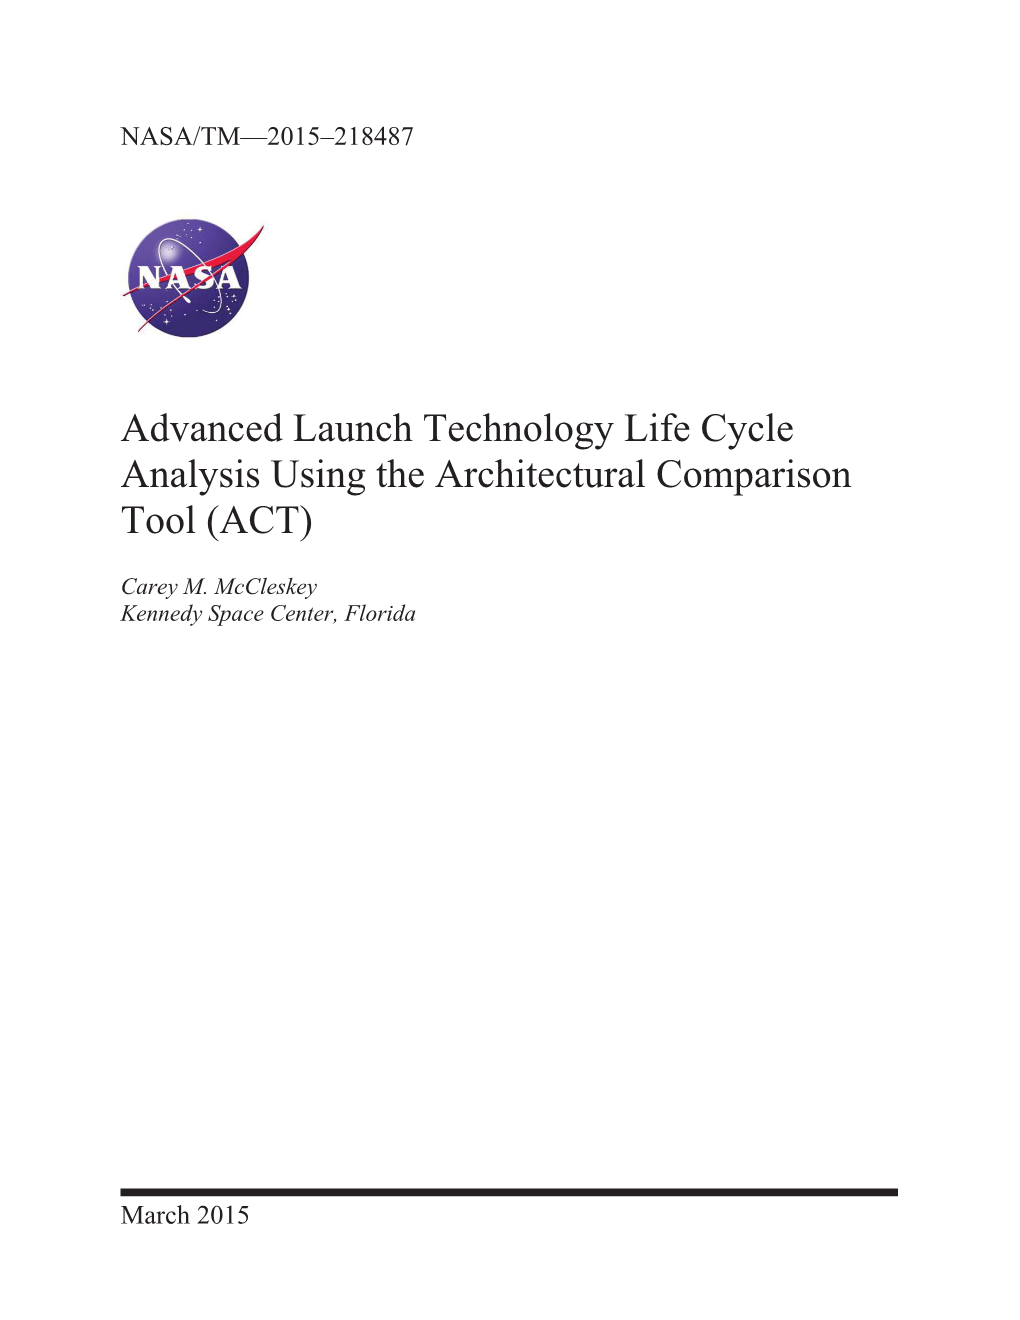 Advanced Launch Technology Life Cycle Analysis Using the Architectural Comparison Tool (ACT)